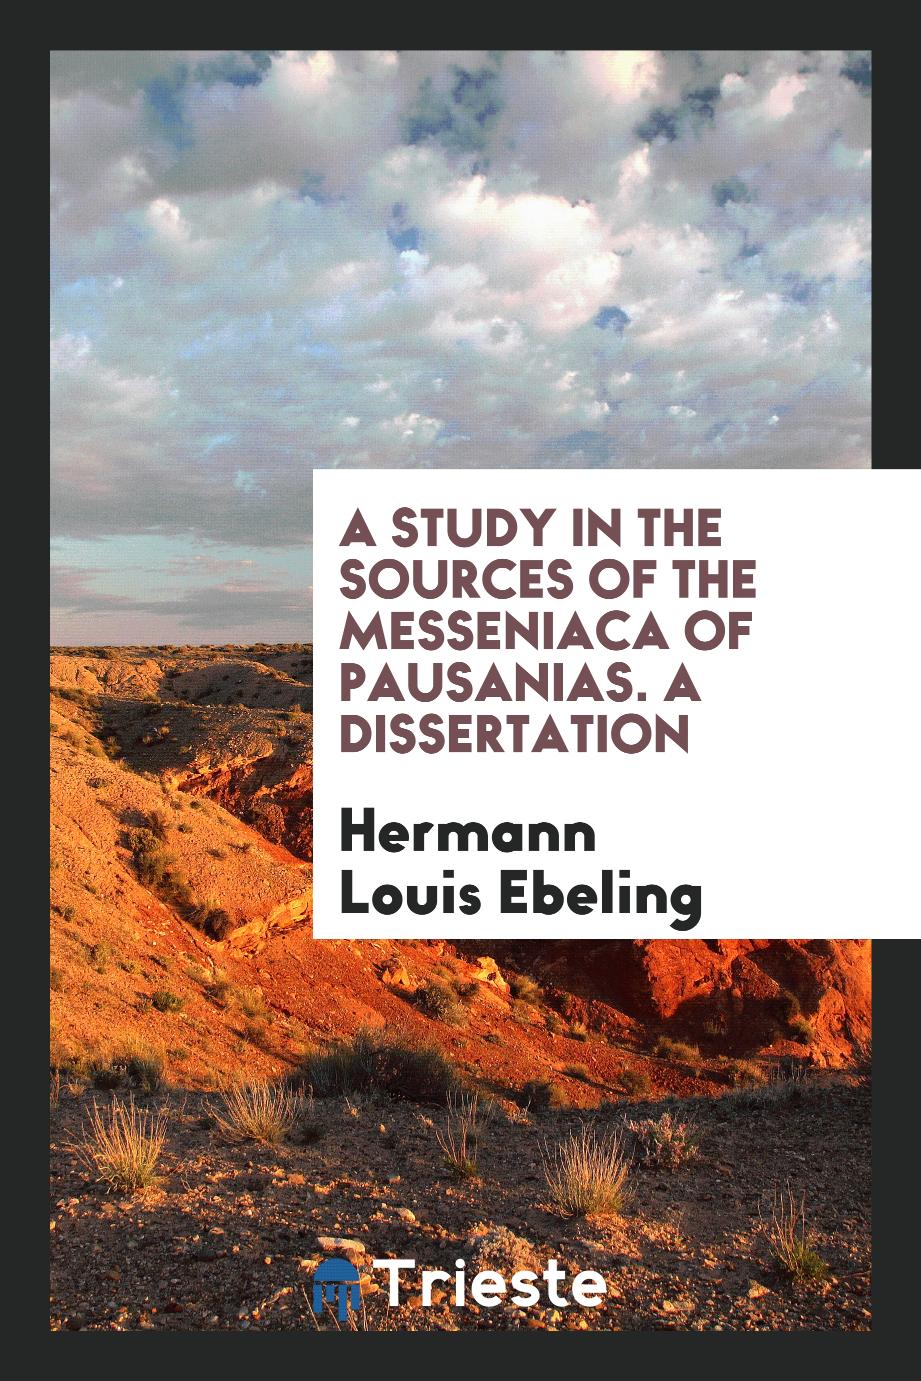 A Study in the Sources of the Messeniaca of Pausanias. A dissertation